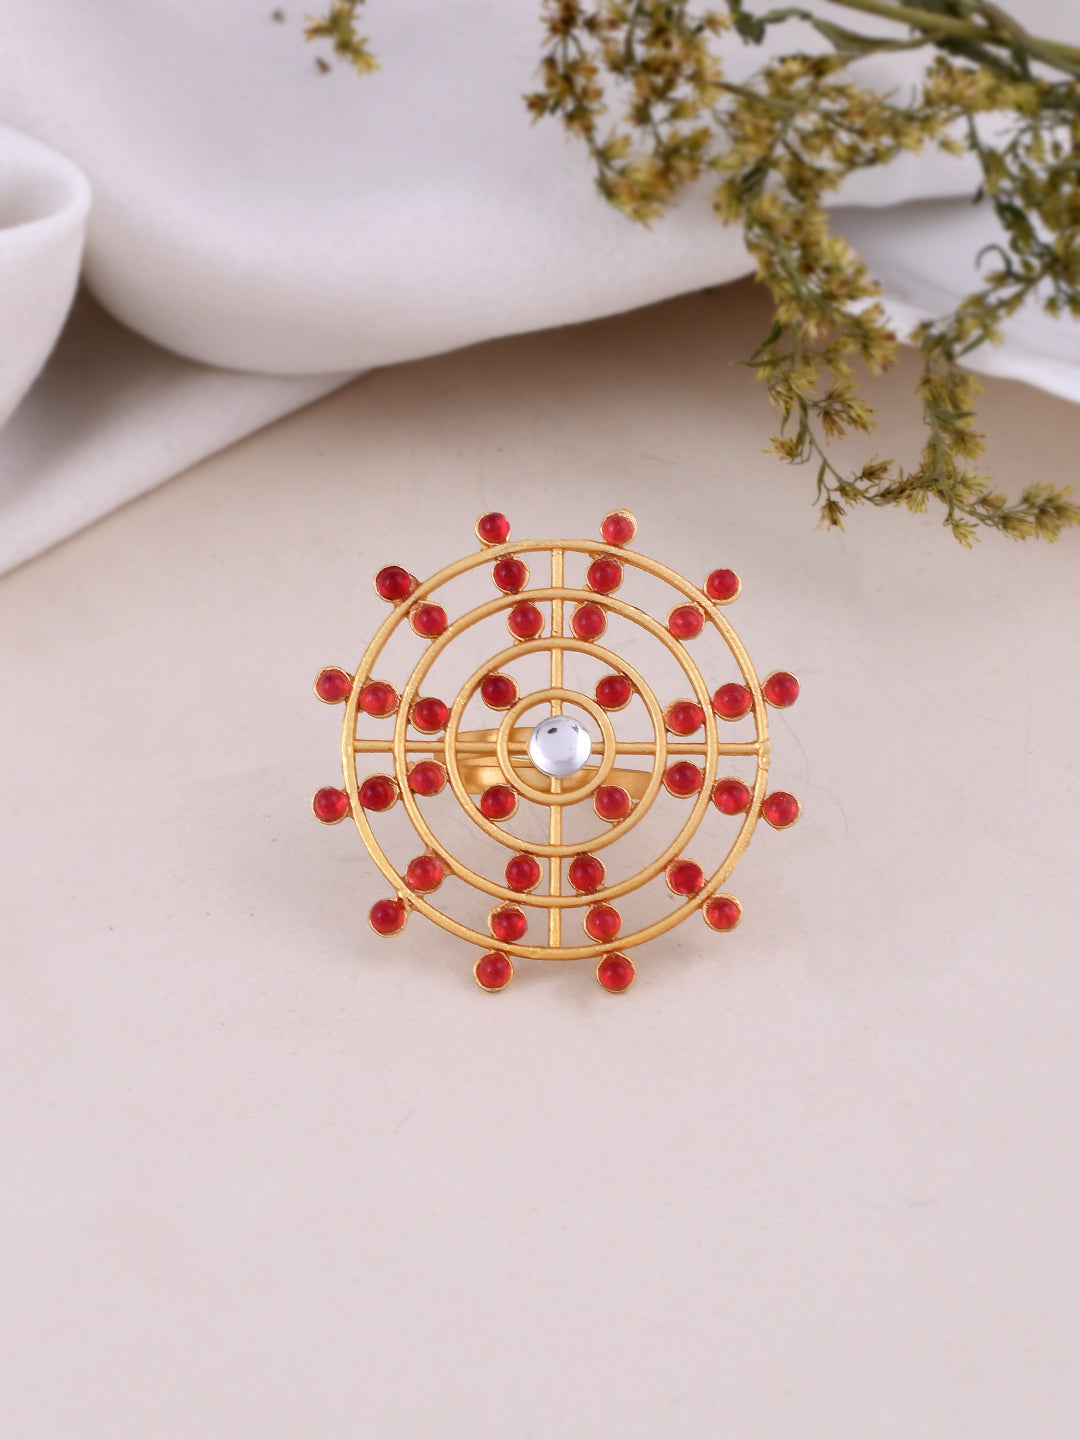 Luxury Gold Plated Cocktail Ring For Women Simulated Diamond Painting Full  Stone Jtv Jewelry In Big Silver From Fashion7house, $21.44 | DHgate.Com